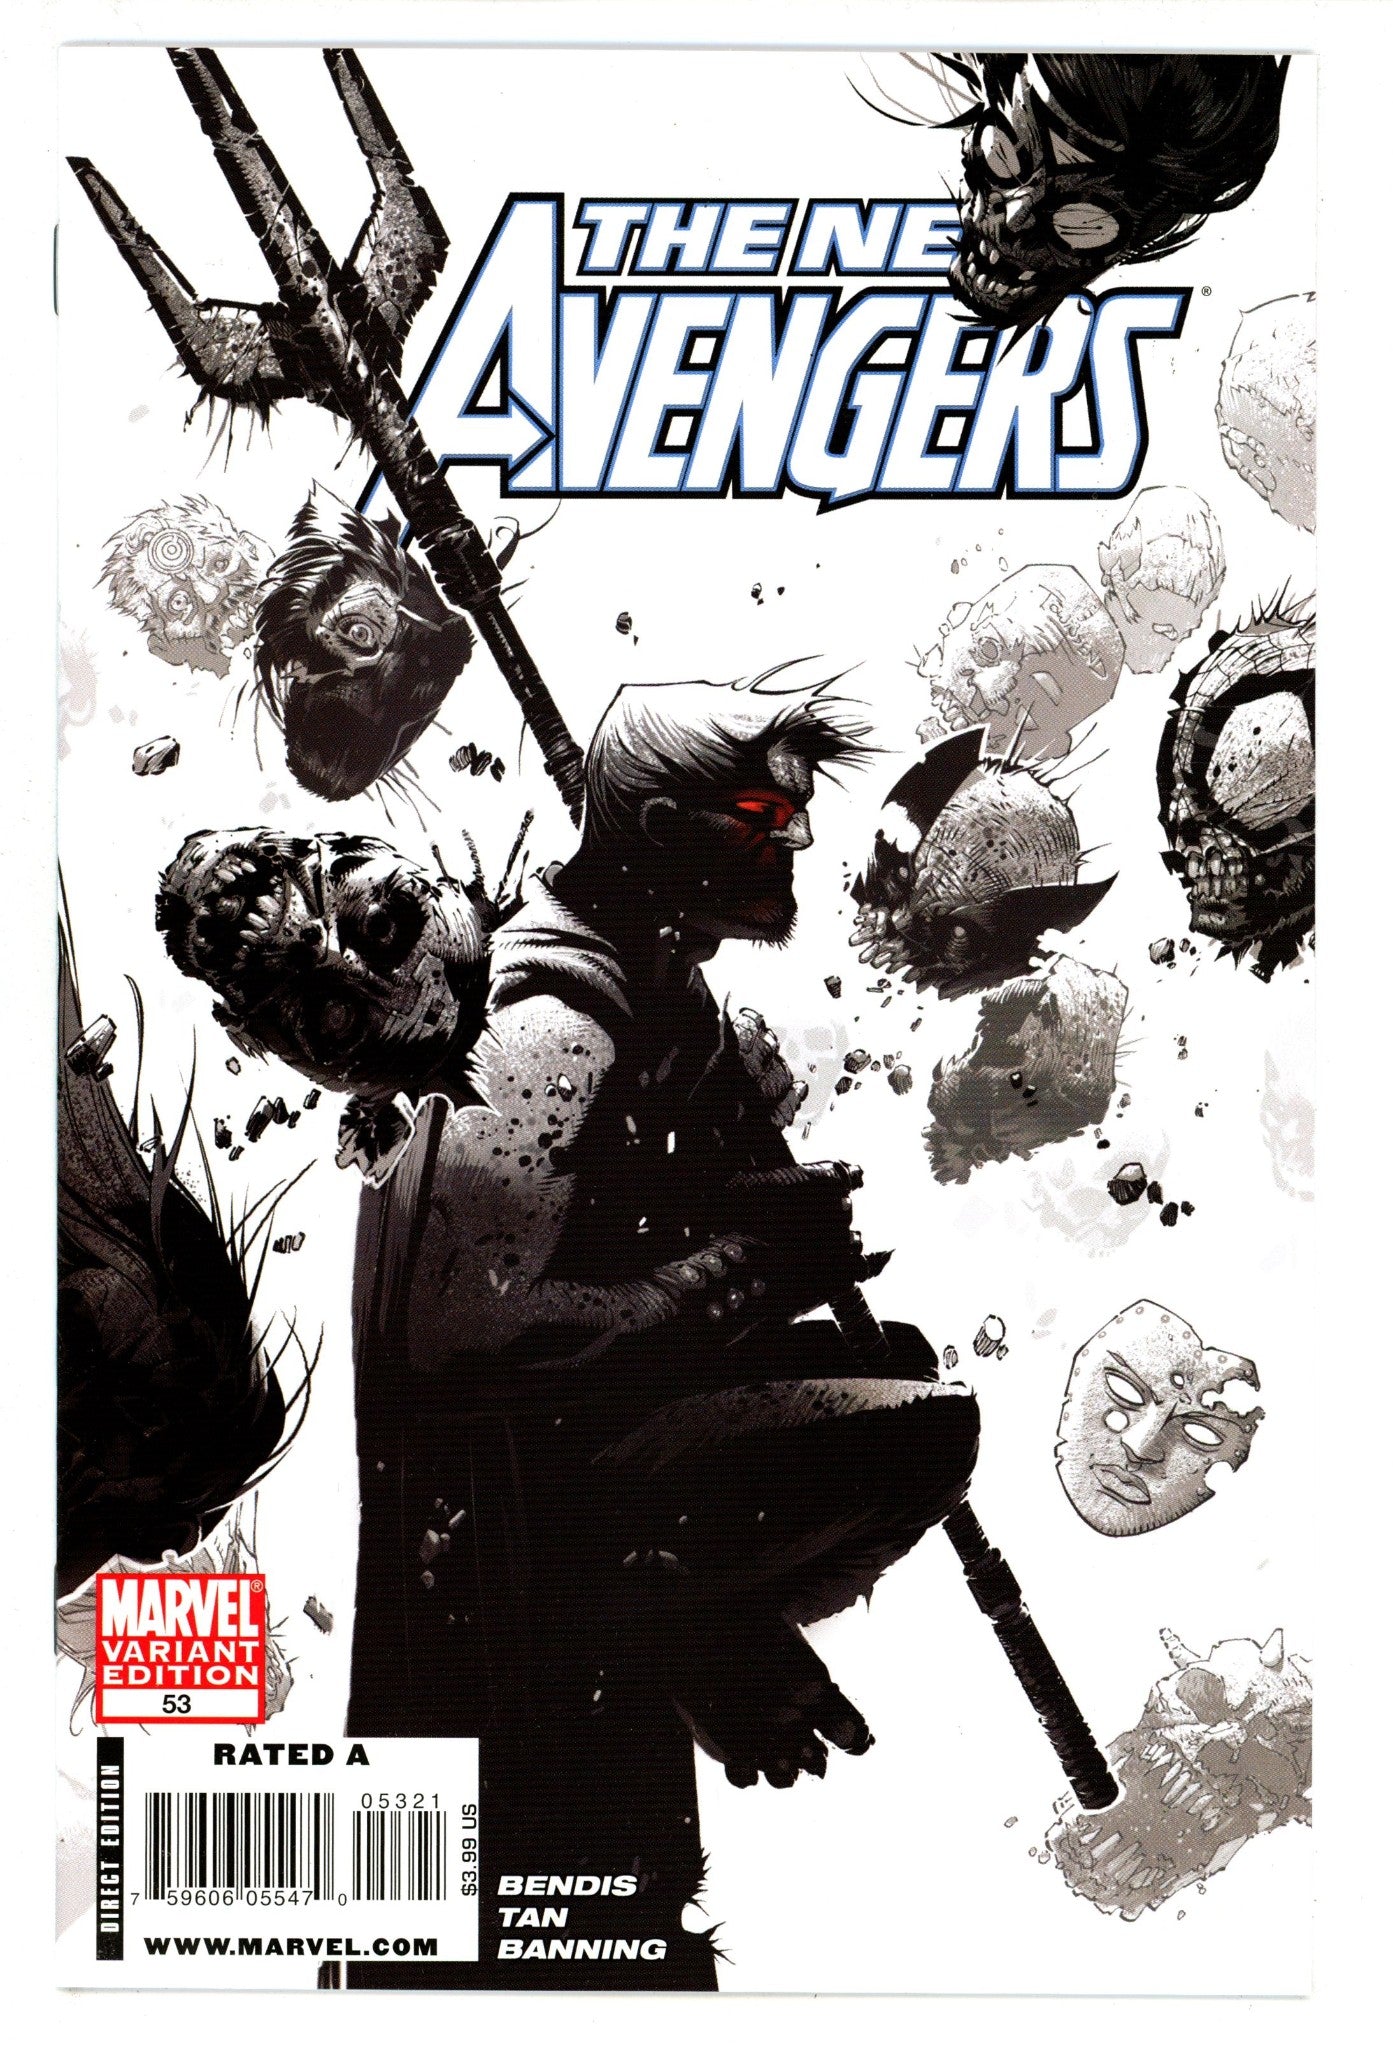 New Avengers Vol 1 53 NM- (9.2) (2009) Bachalo Incentive Variant 